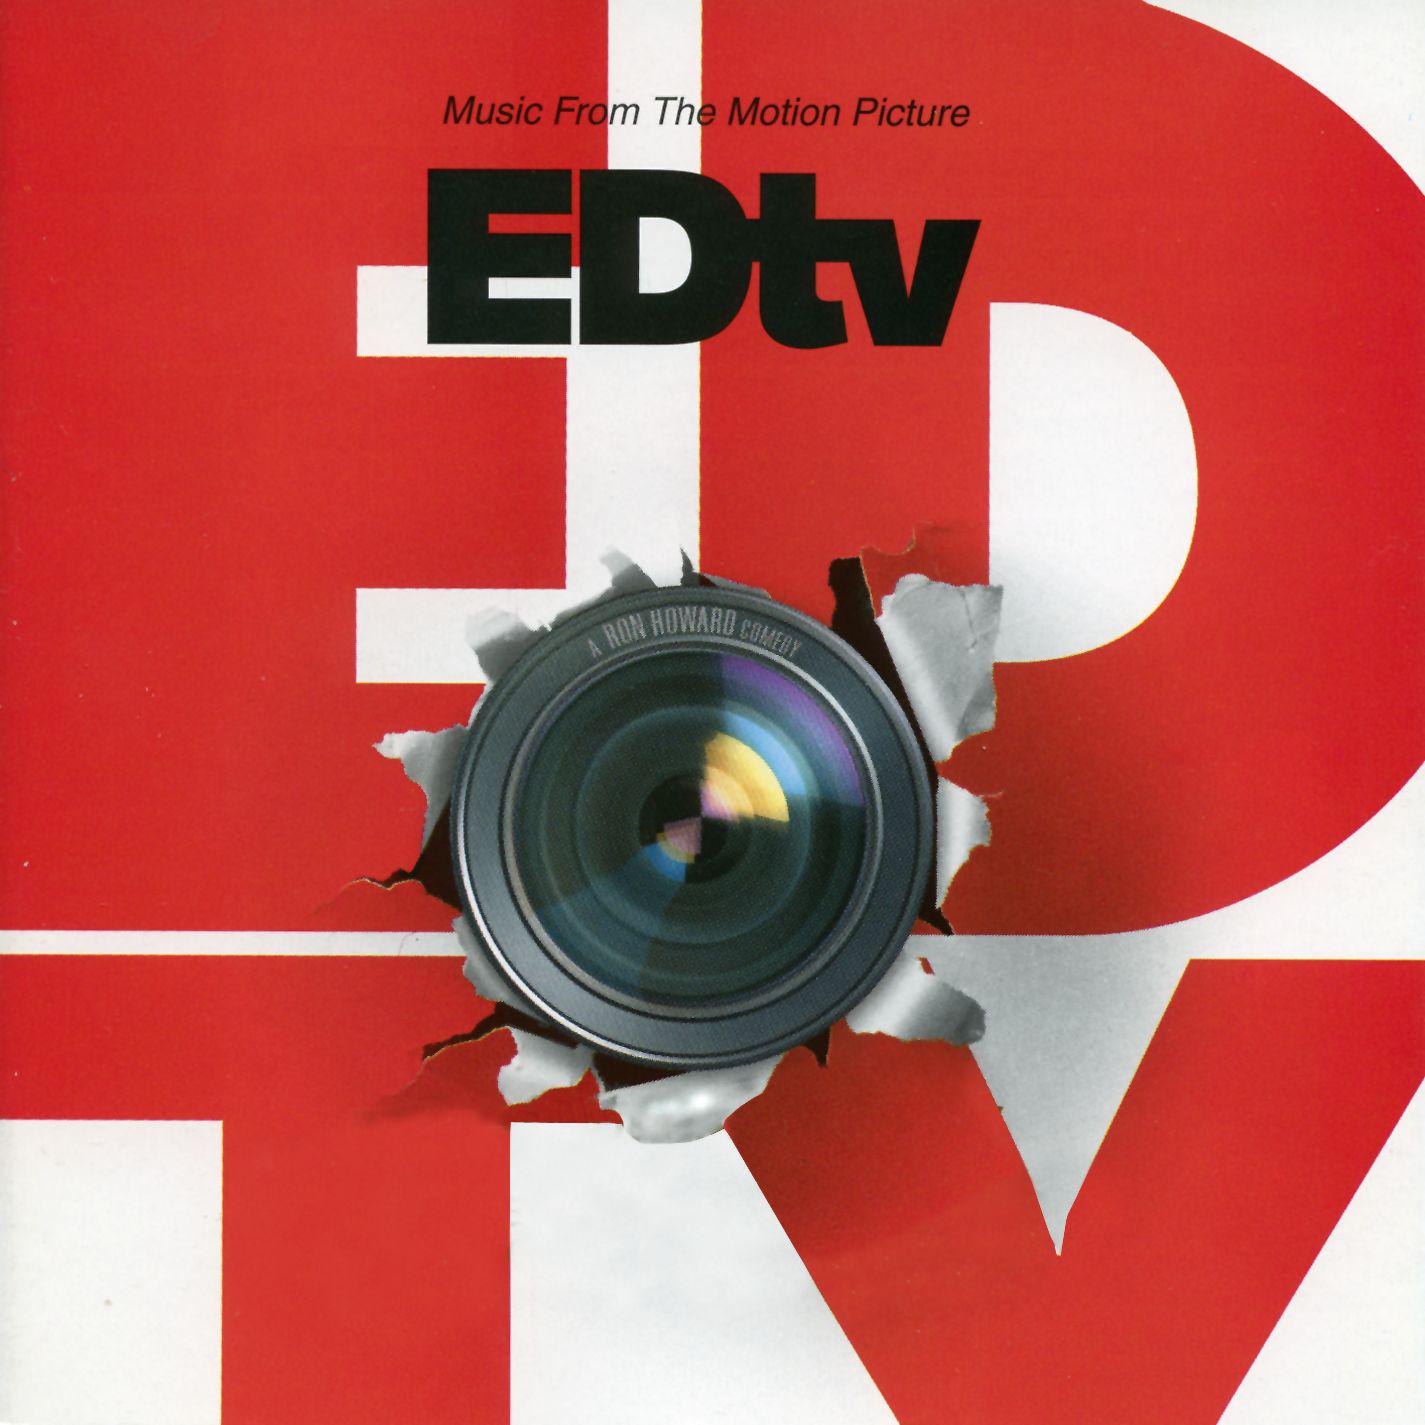 Ed TV (Music From The Motion Picture)